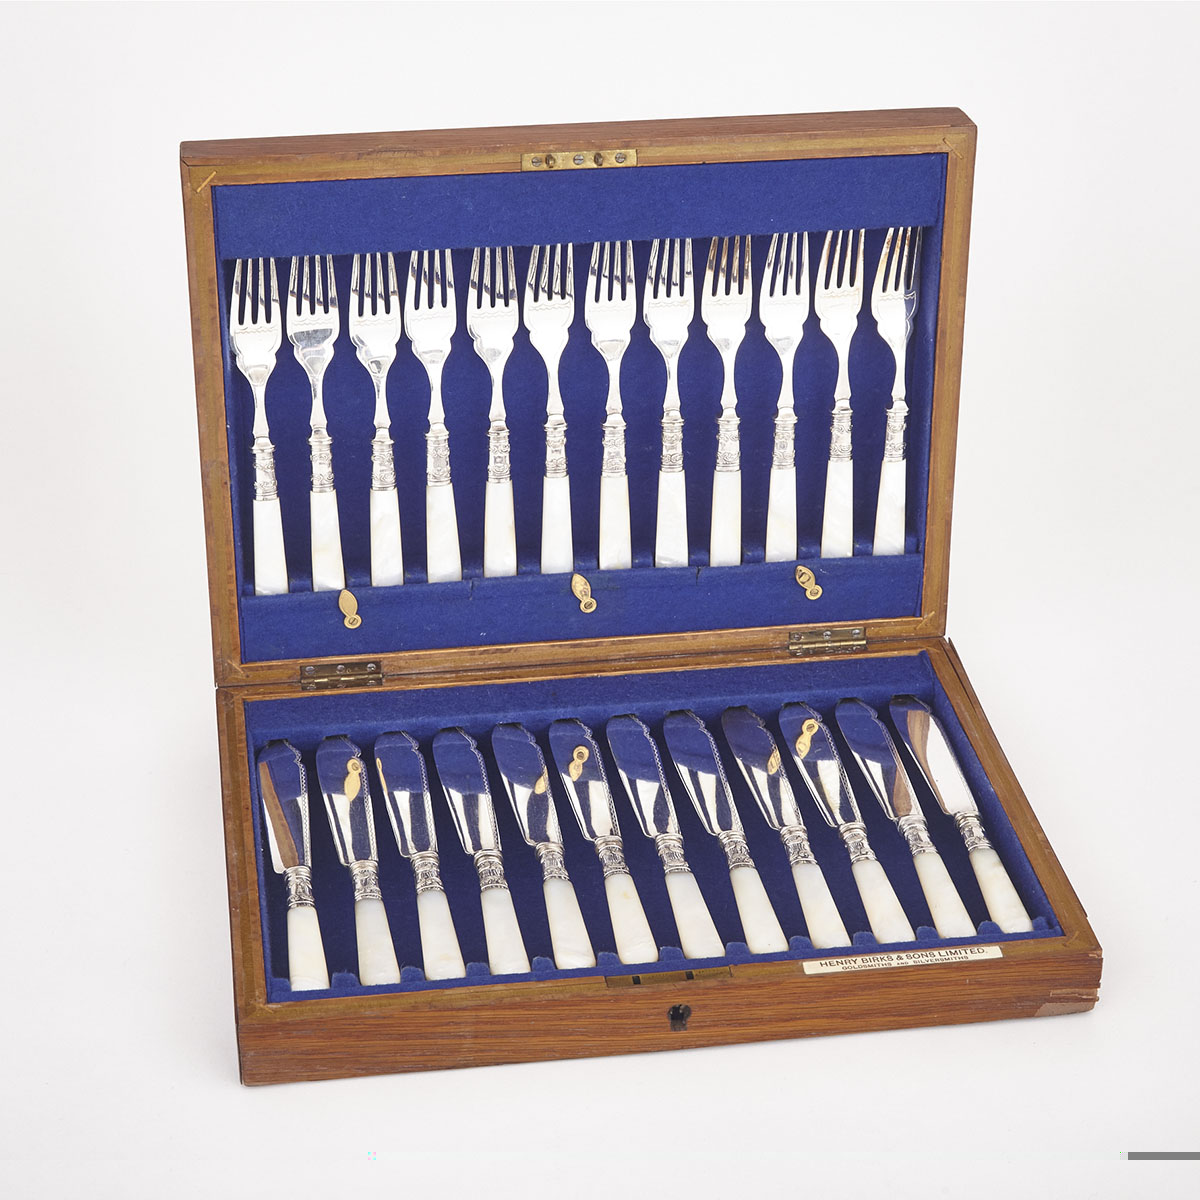 Canadian Silver Plated and Mother-of-Pearl Fish Service, Henry Birks & Sons, early 20th century